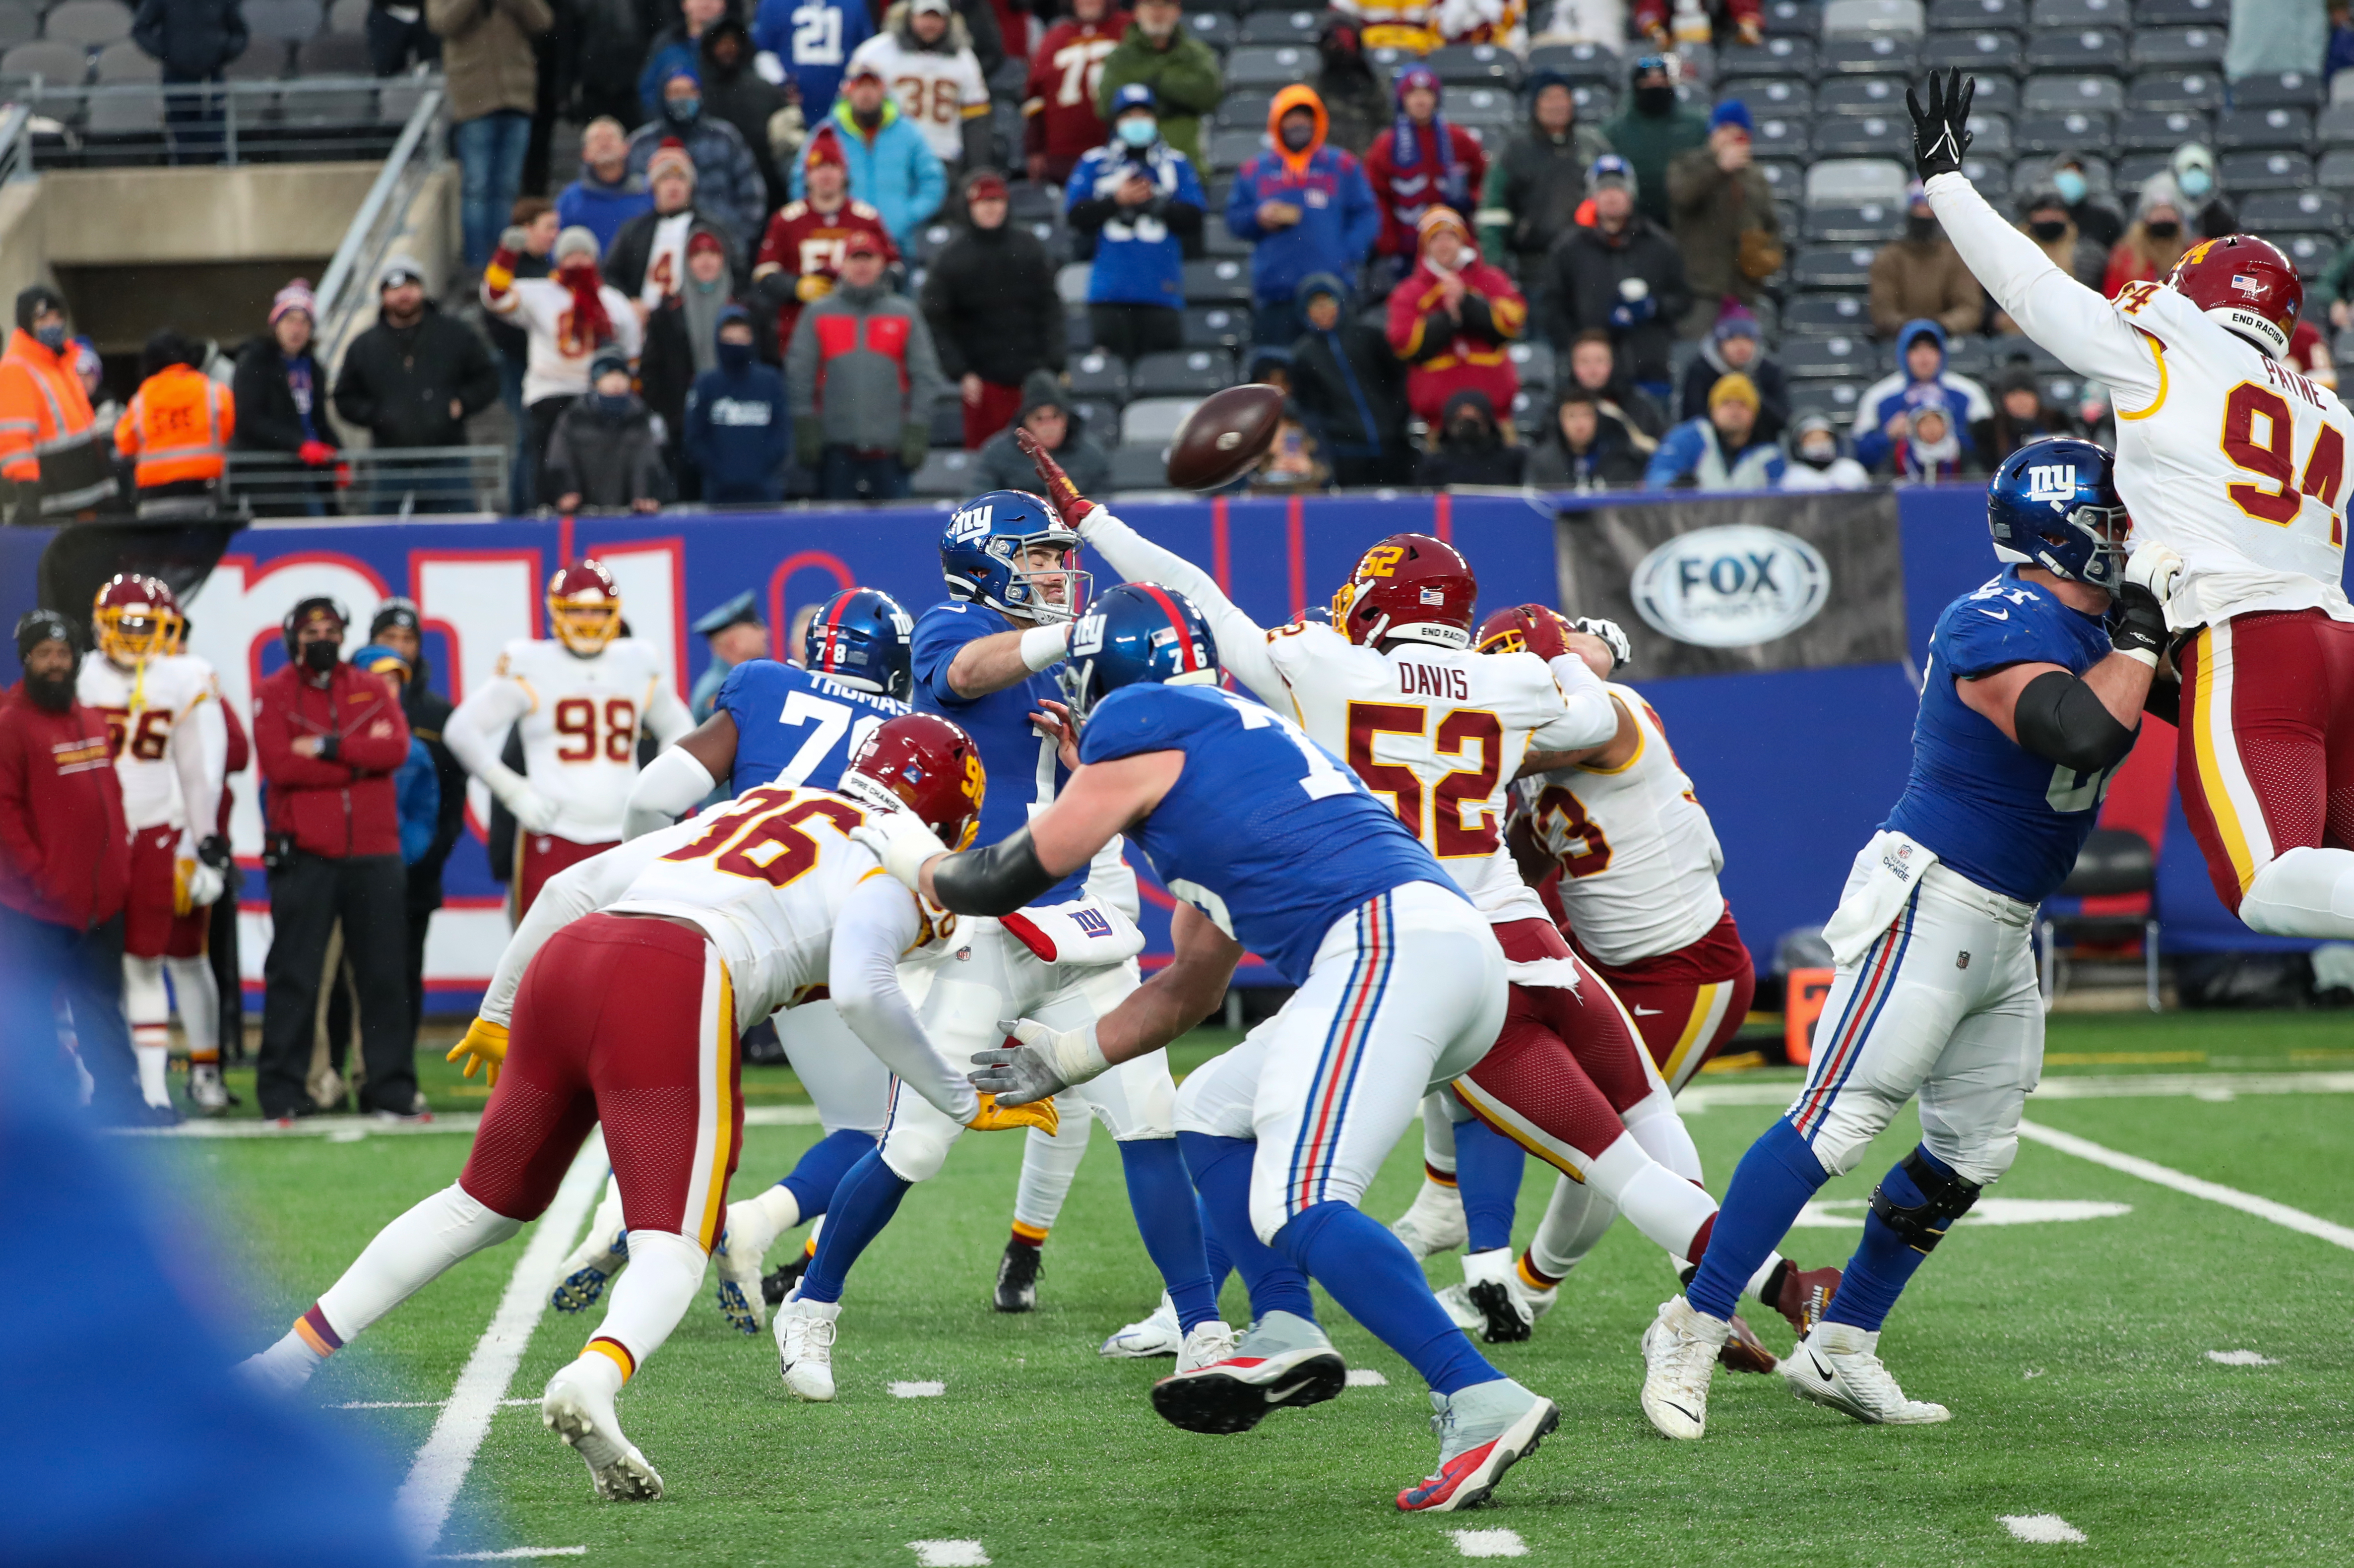 New York Giants quarterback Jake Fromm (17) throws a game-ending interception late in the fourth quarter against the Washington Football Team on Sunday, Jan. 9, 2022 in East Rutherford, N.J. Washington won, 22-7.